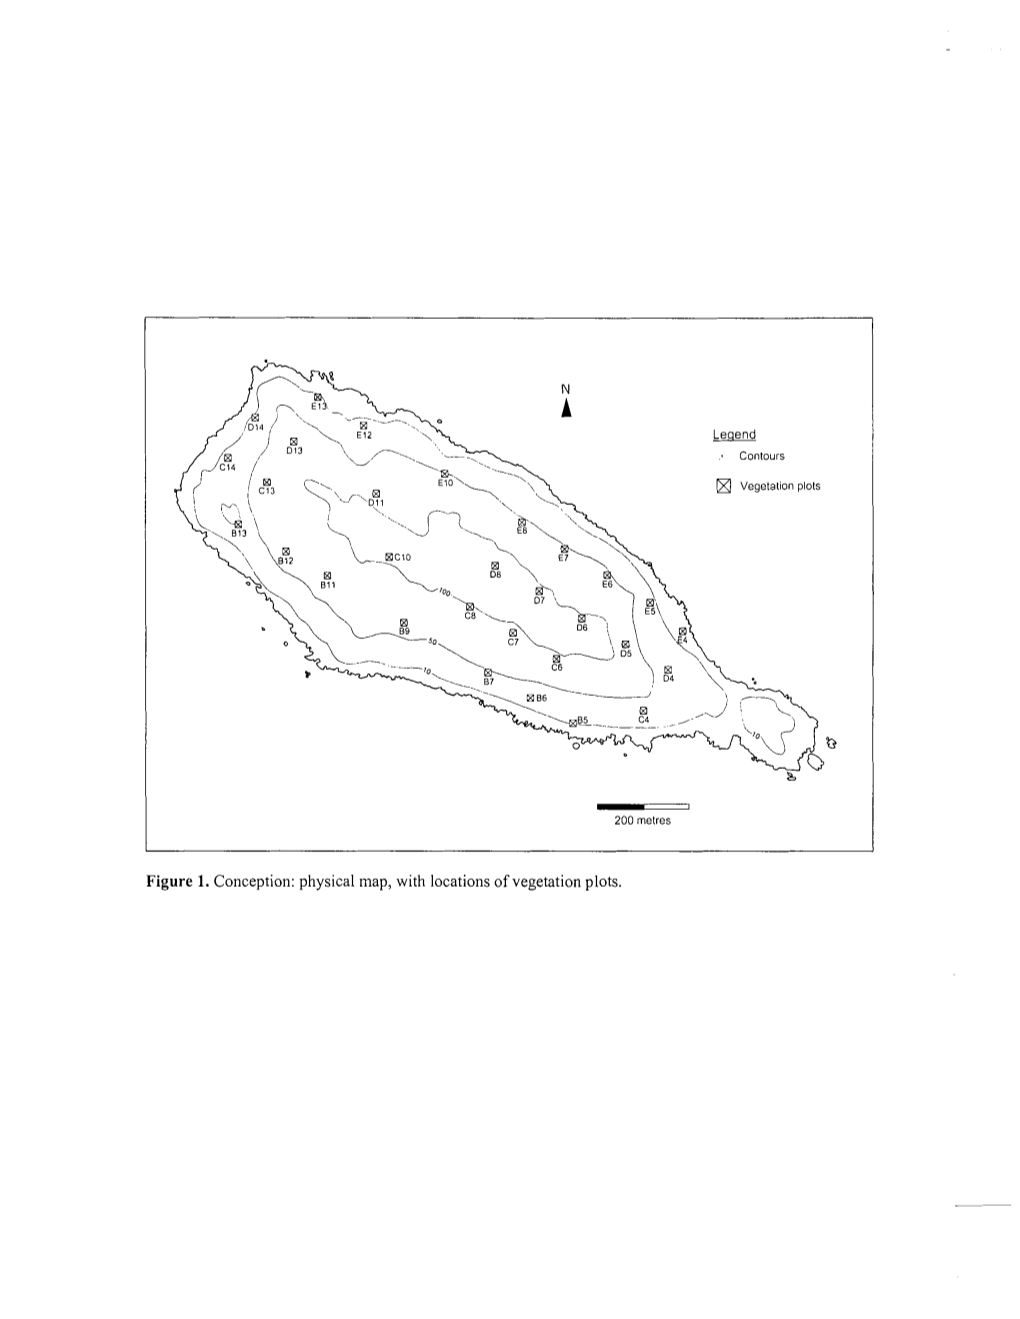 Figure 1. Conception: Physical Map, with Locations of Vegetation Plots. CONCEPTION